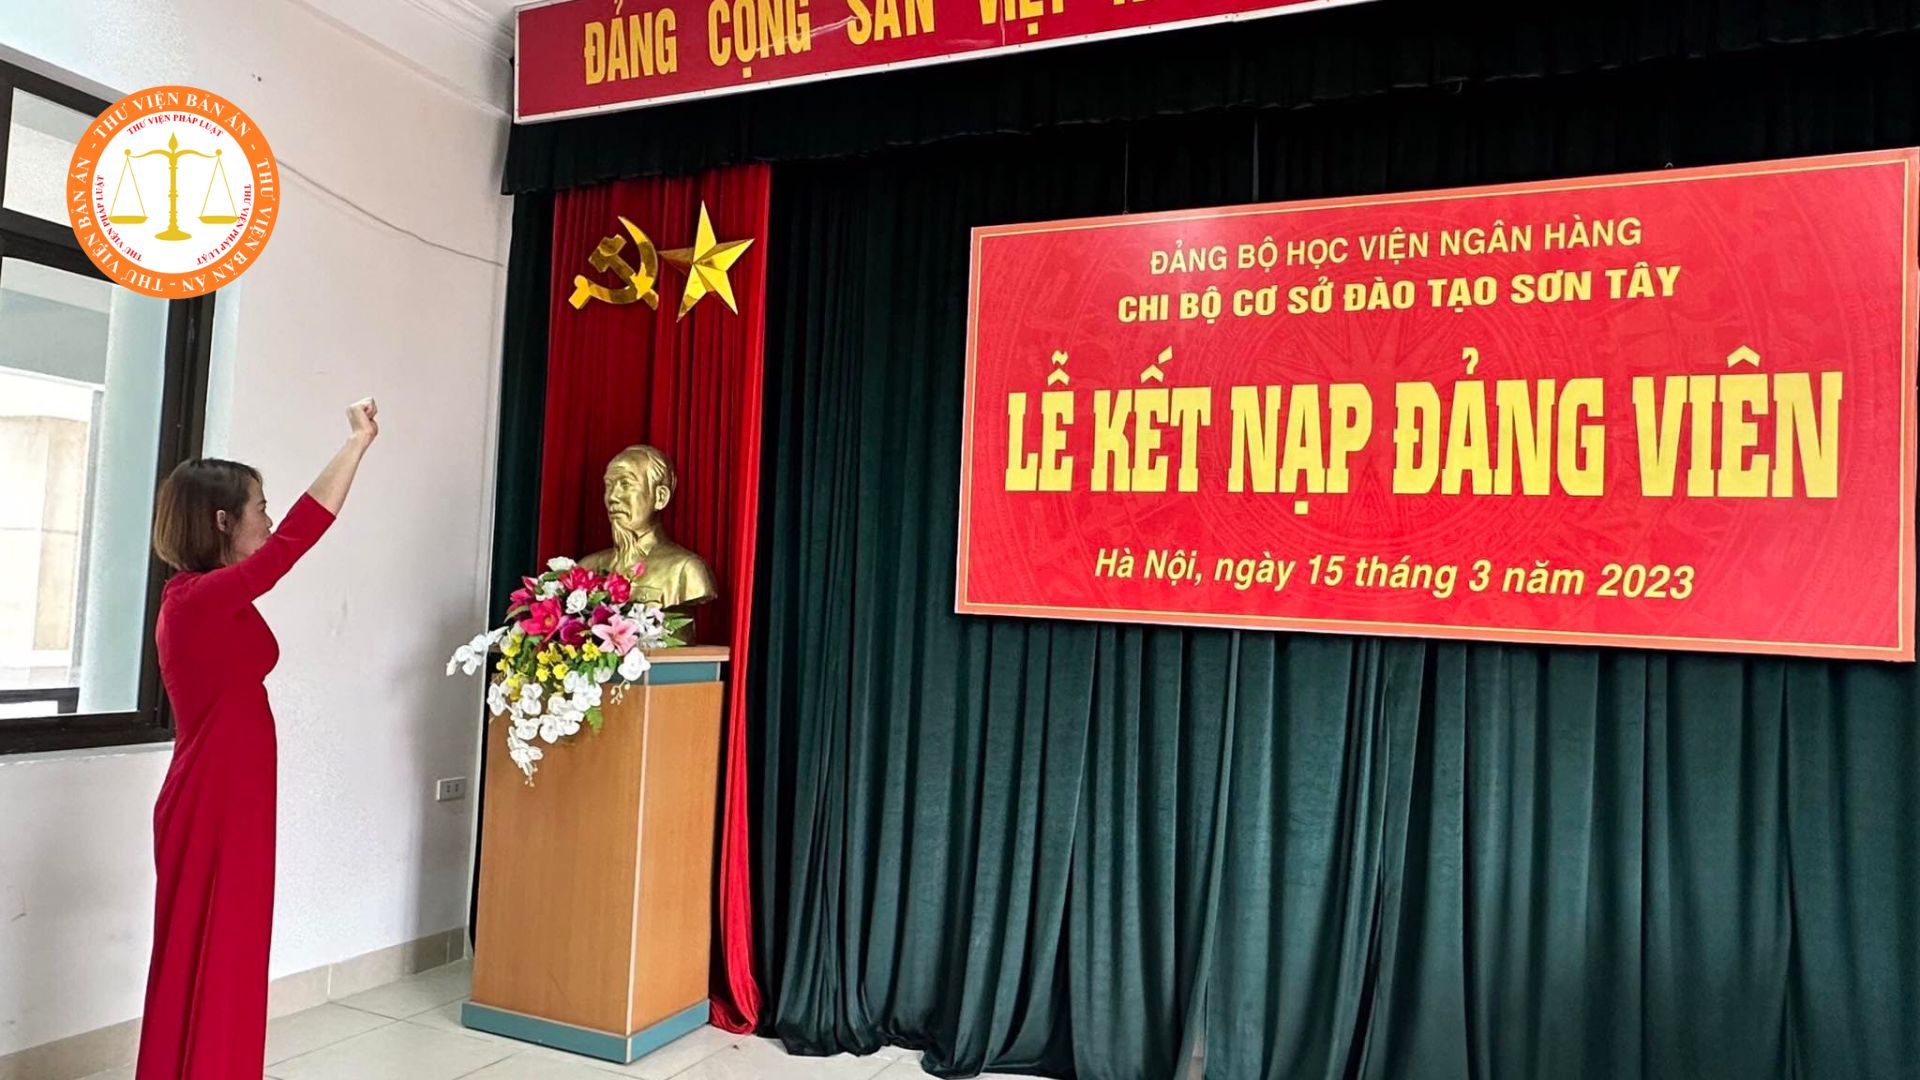 Conditions for introducing and admitting Party members according to Regulation 24-QD/TW in Vietnam